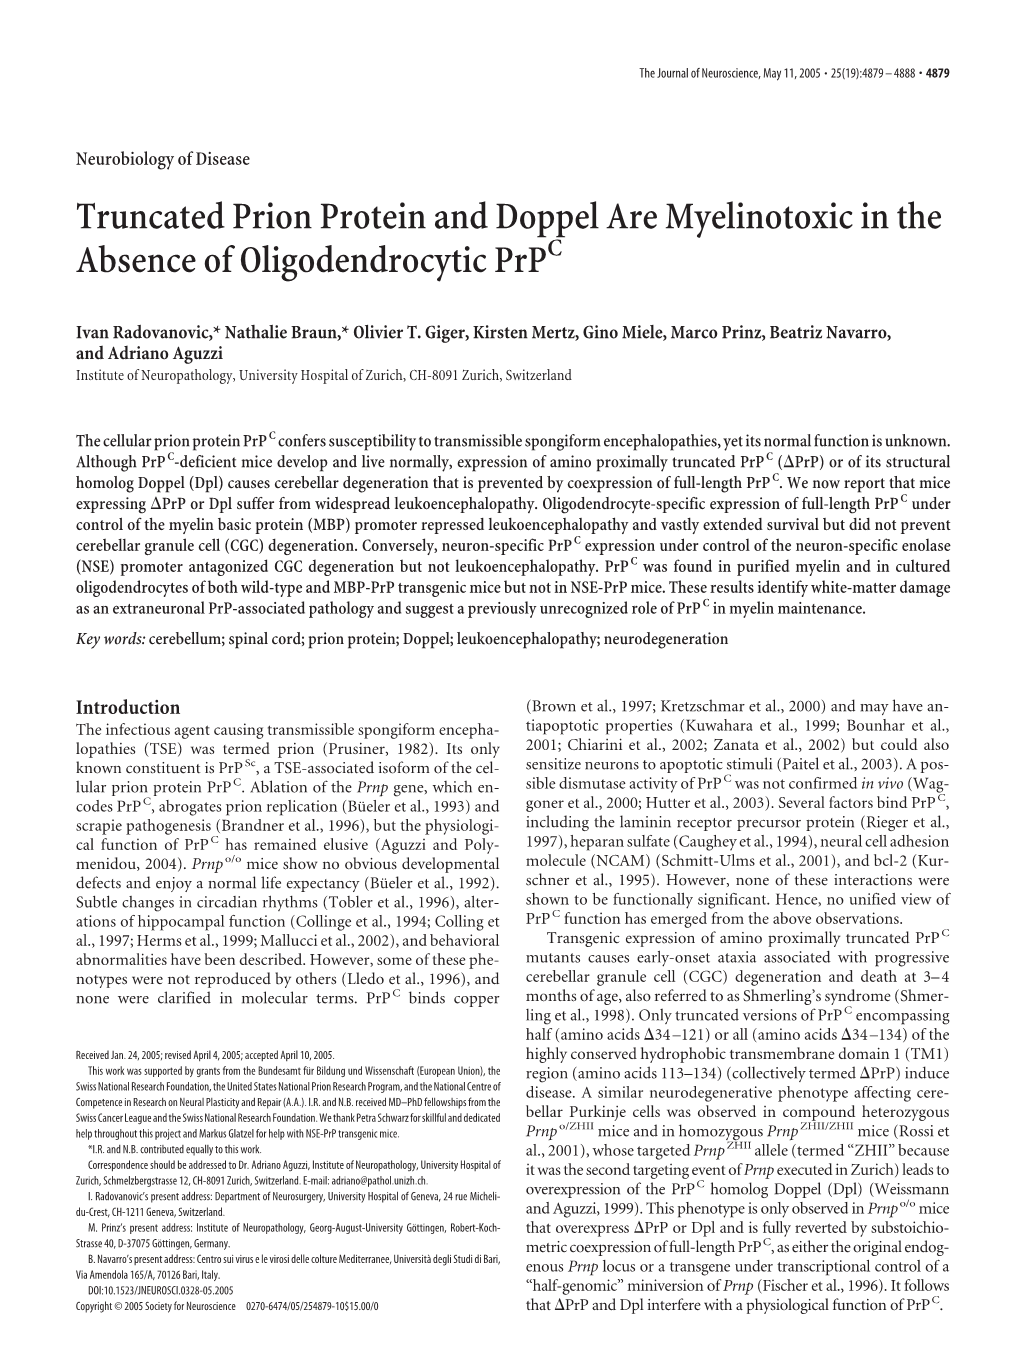 Truncated Prion Protein and Doppel Are Myelinotoxic in the Absence of Oligodendrocytic Prpc